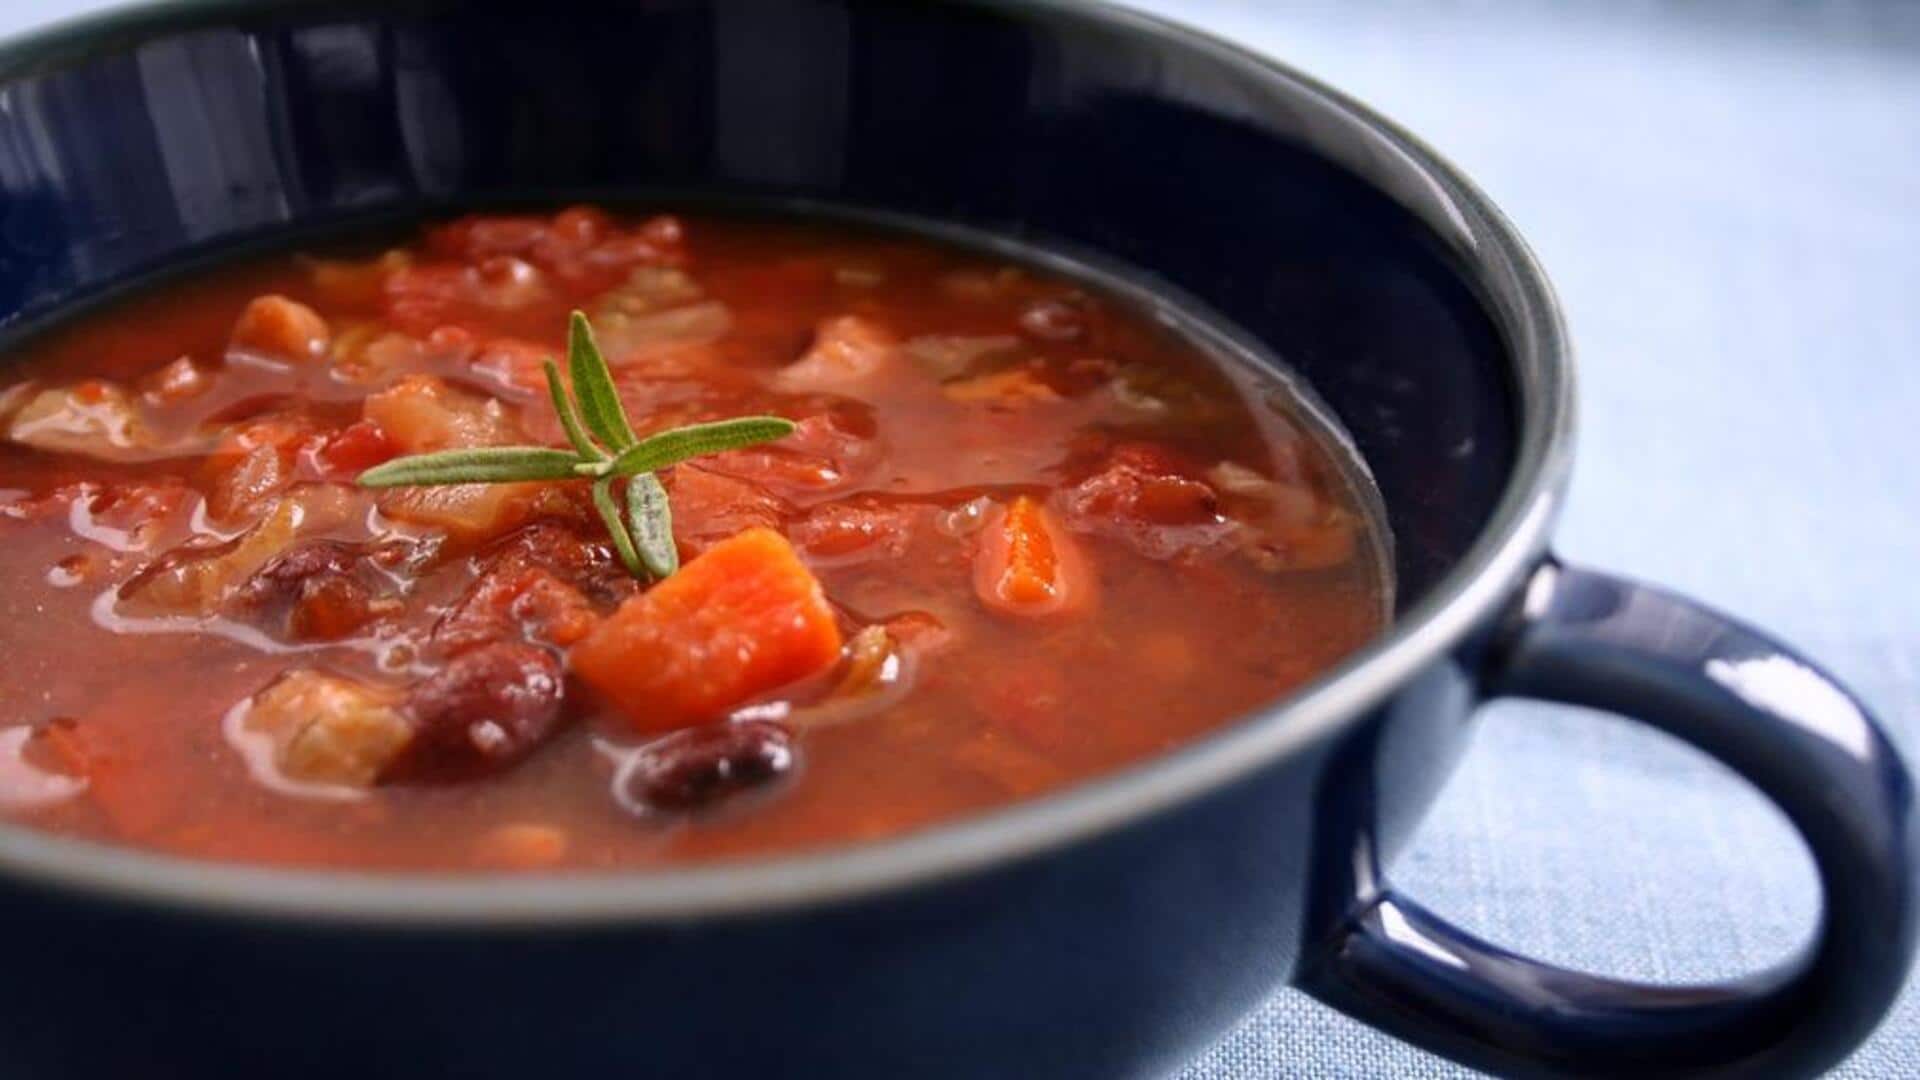 Cook vegan goulash at home with this recipe